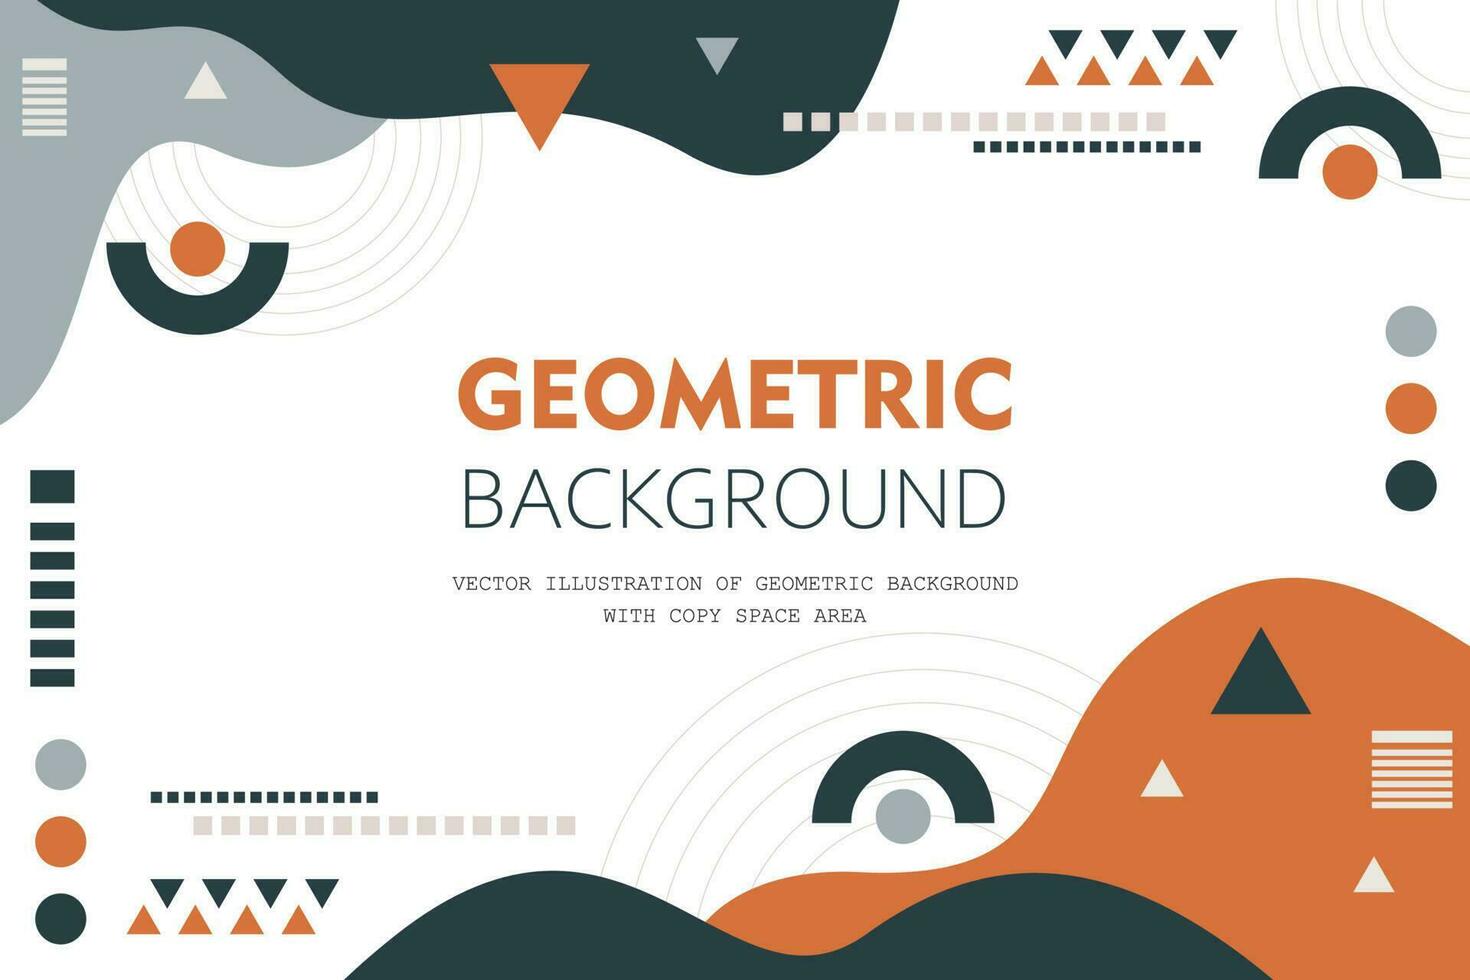 Vector illustration of geometric background with copy space area